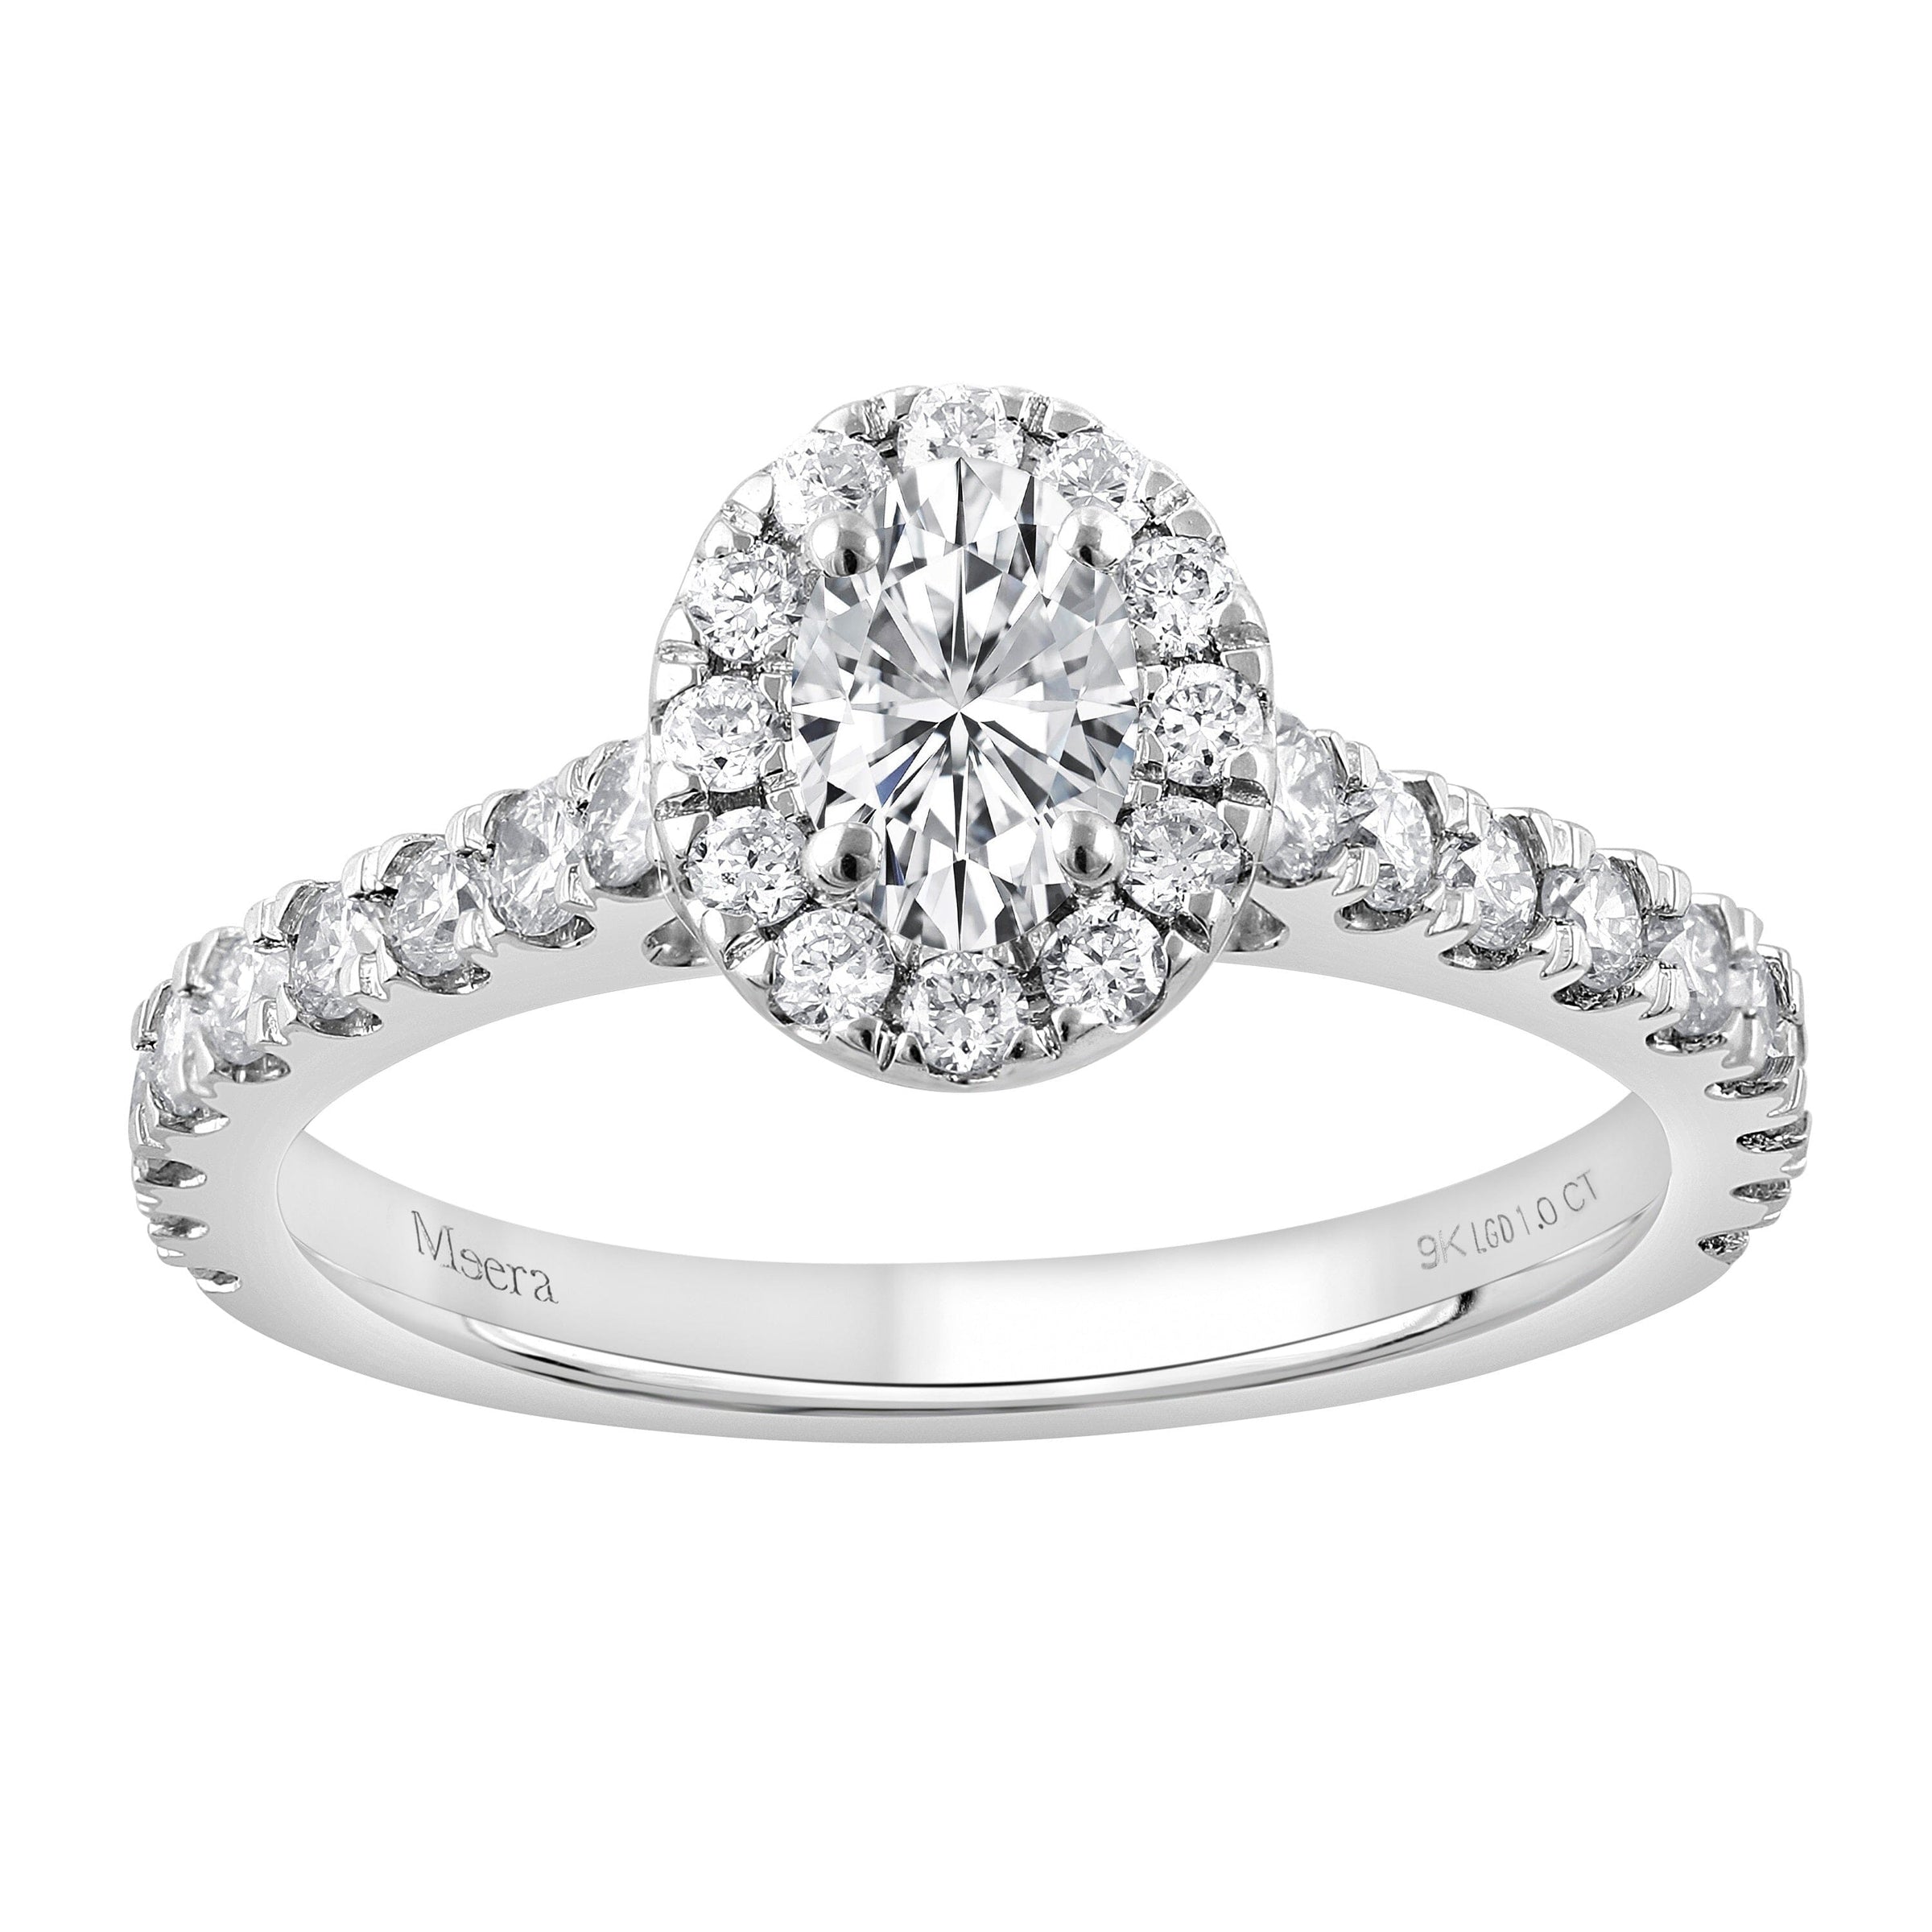 Meera Oval Cut Solitaire Ring with 1.00ct of Laboratory Grown Diamonds in 9ct White Gold Rings Bevilles 